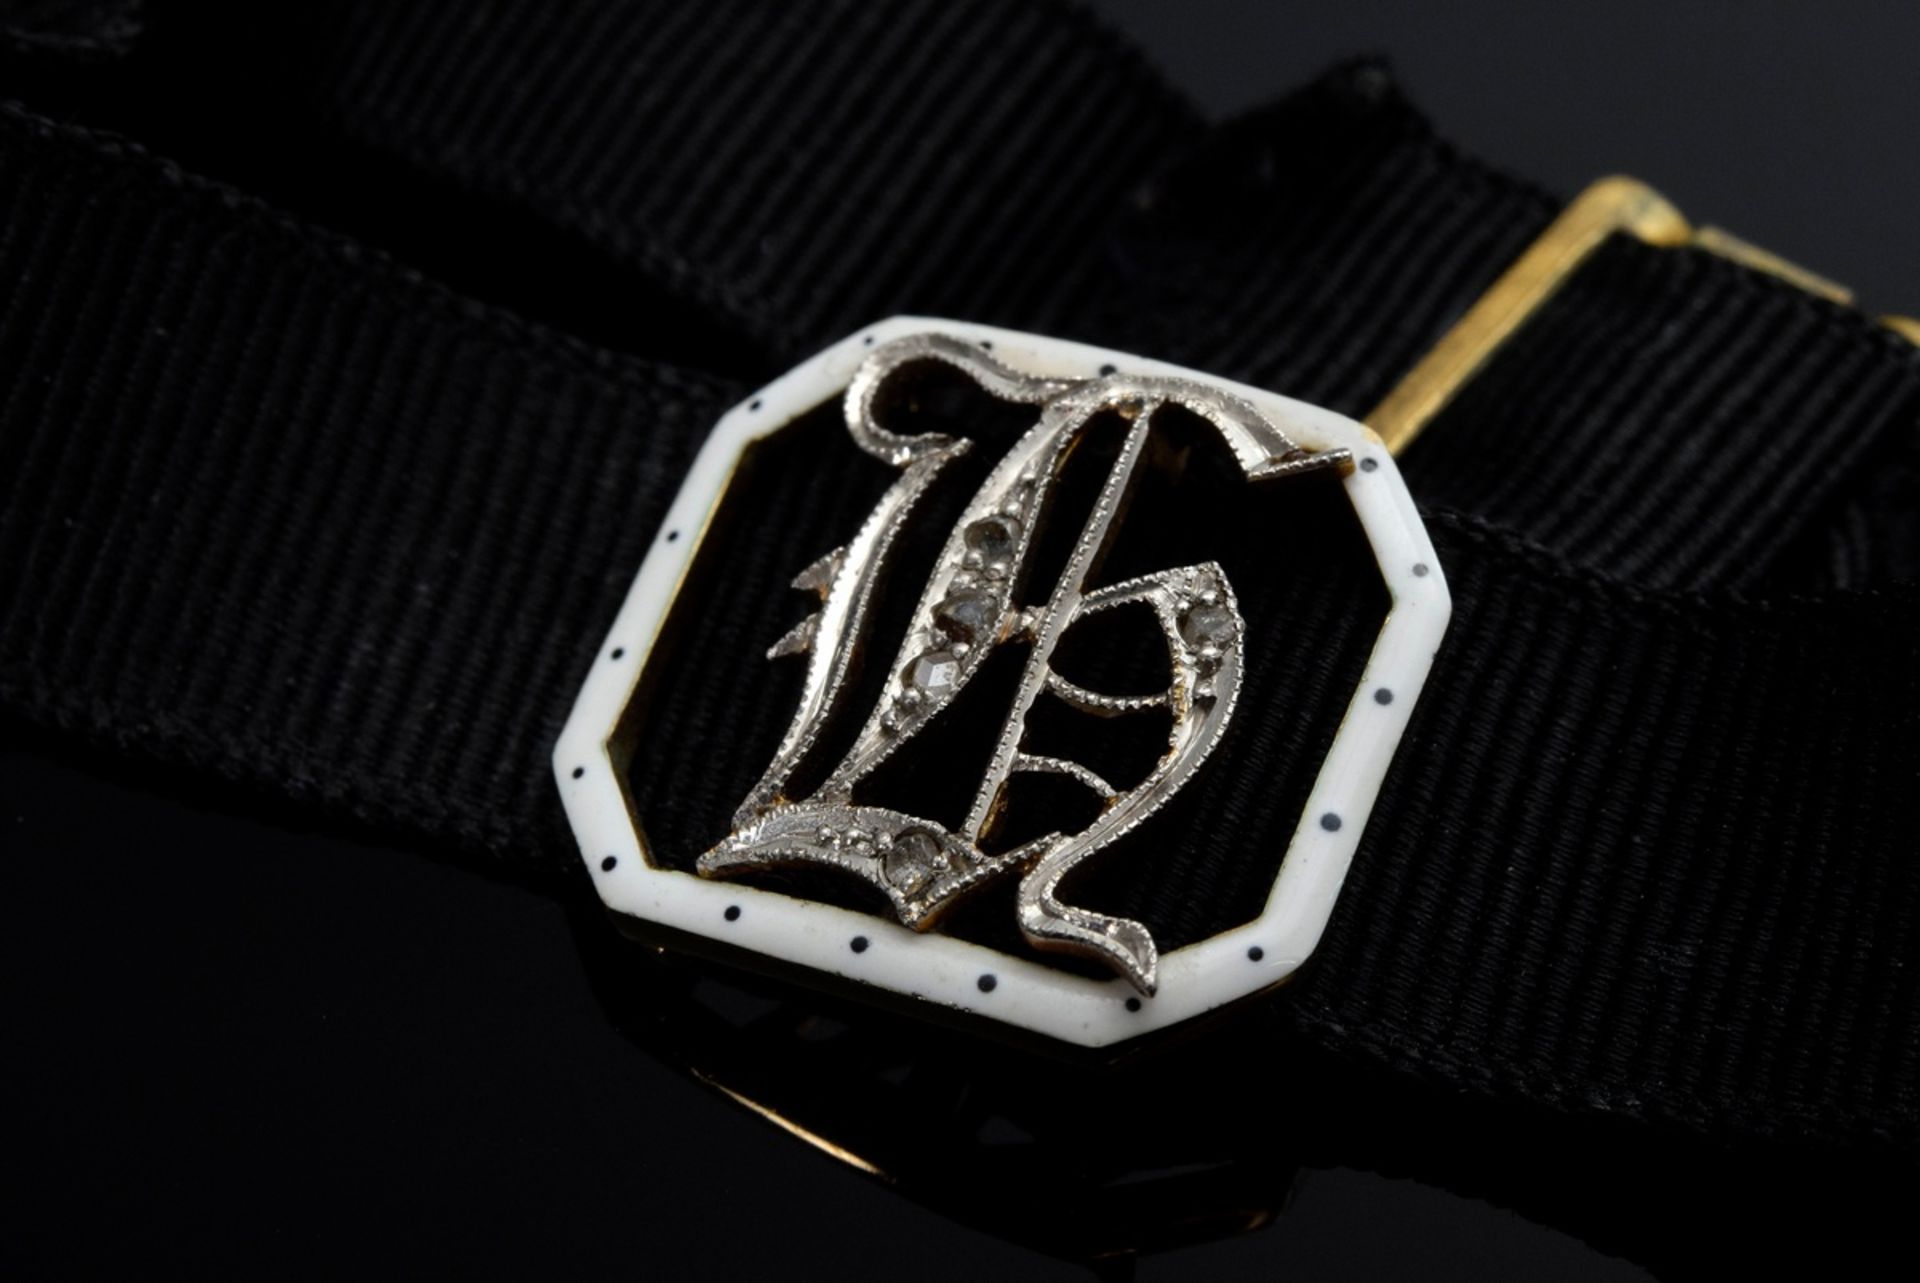 Black rep bracelet with openwork yellow gold 585 monogram plaque "H" and small diamond roses in ena - Image 2 of 3